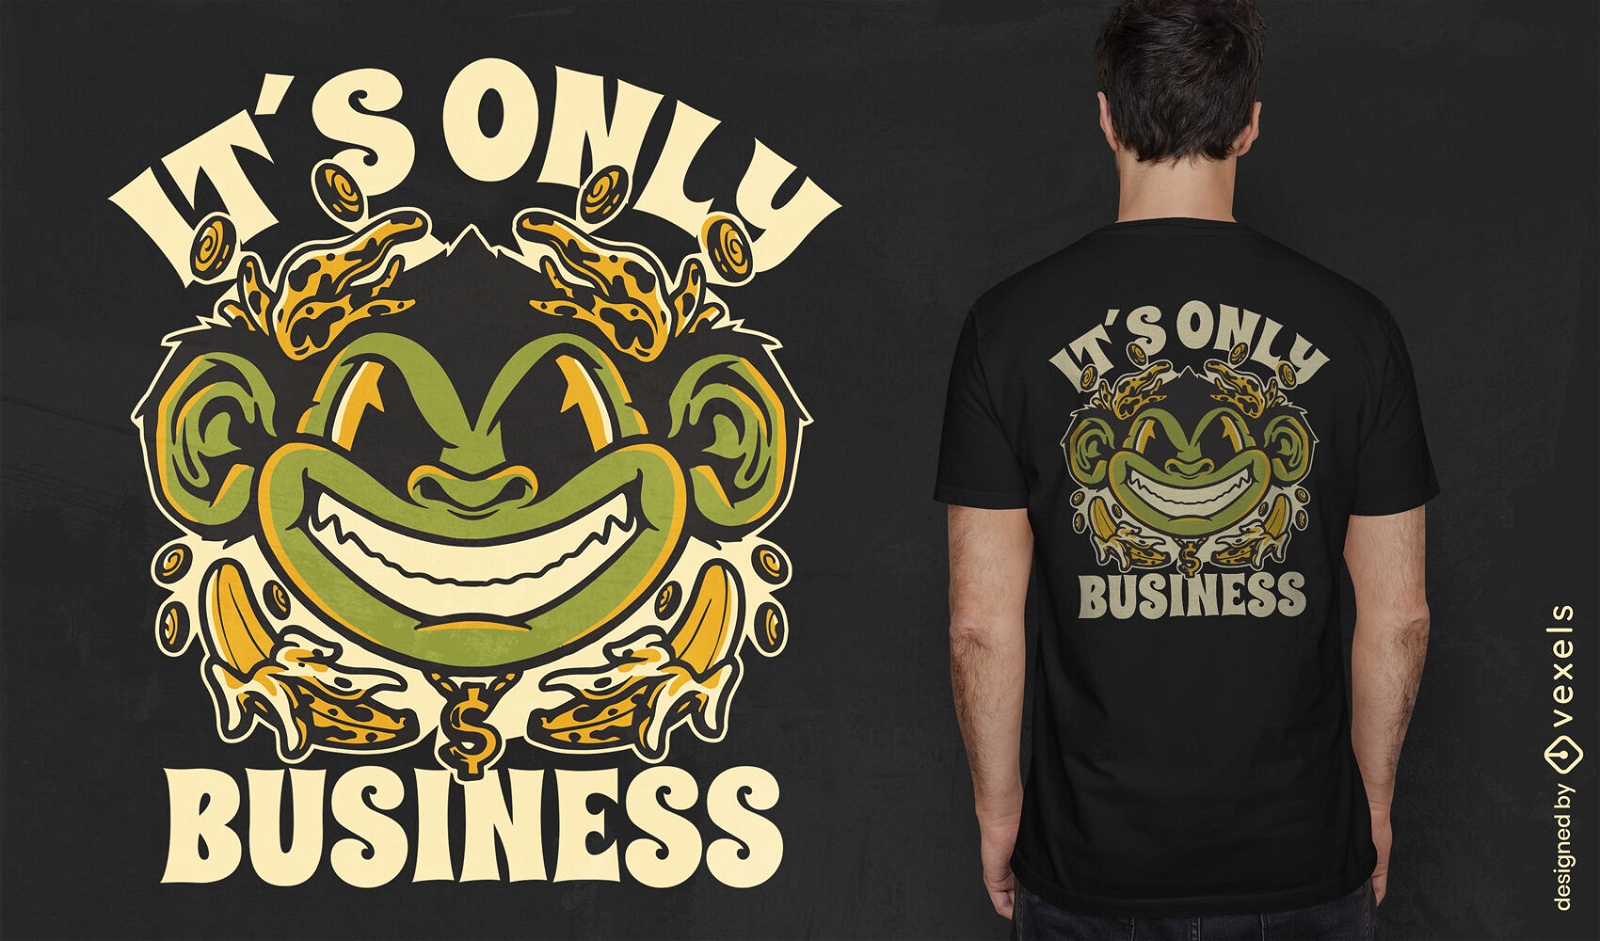 It's only business monkey t-shirt design